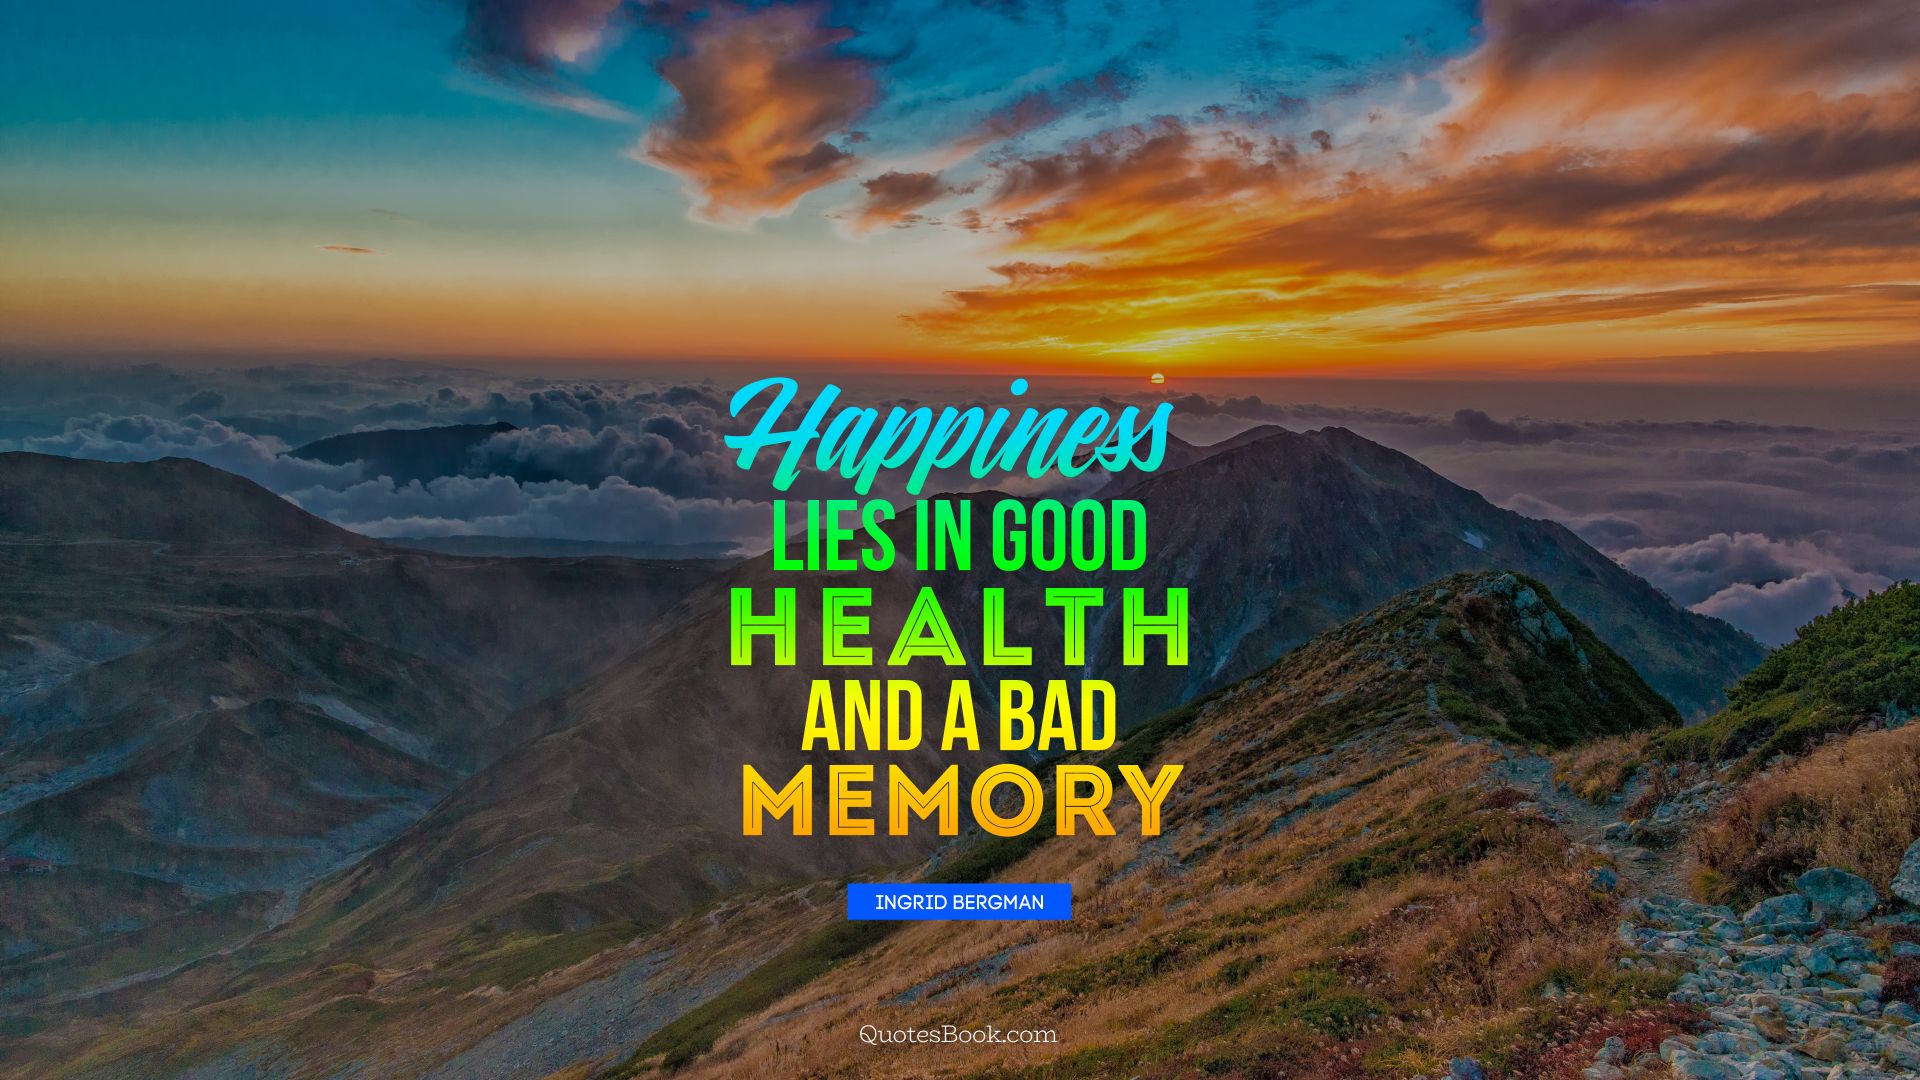 Happiness lies in good health and a bad memory. - Quote by Ingrid Bergman